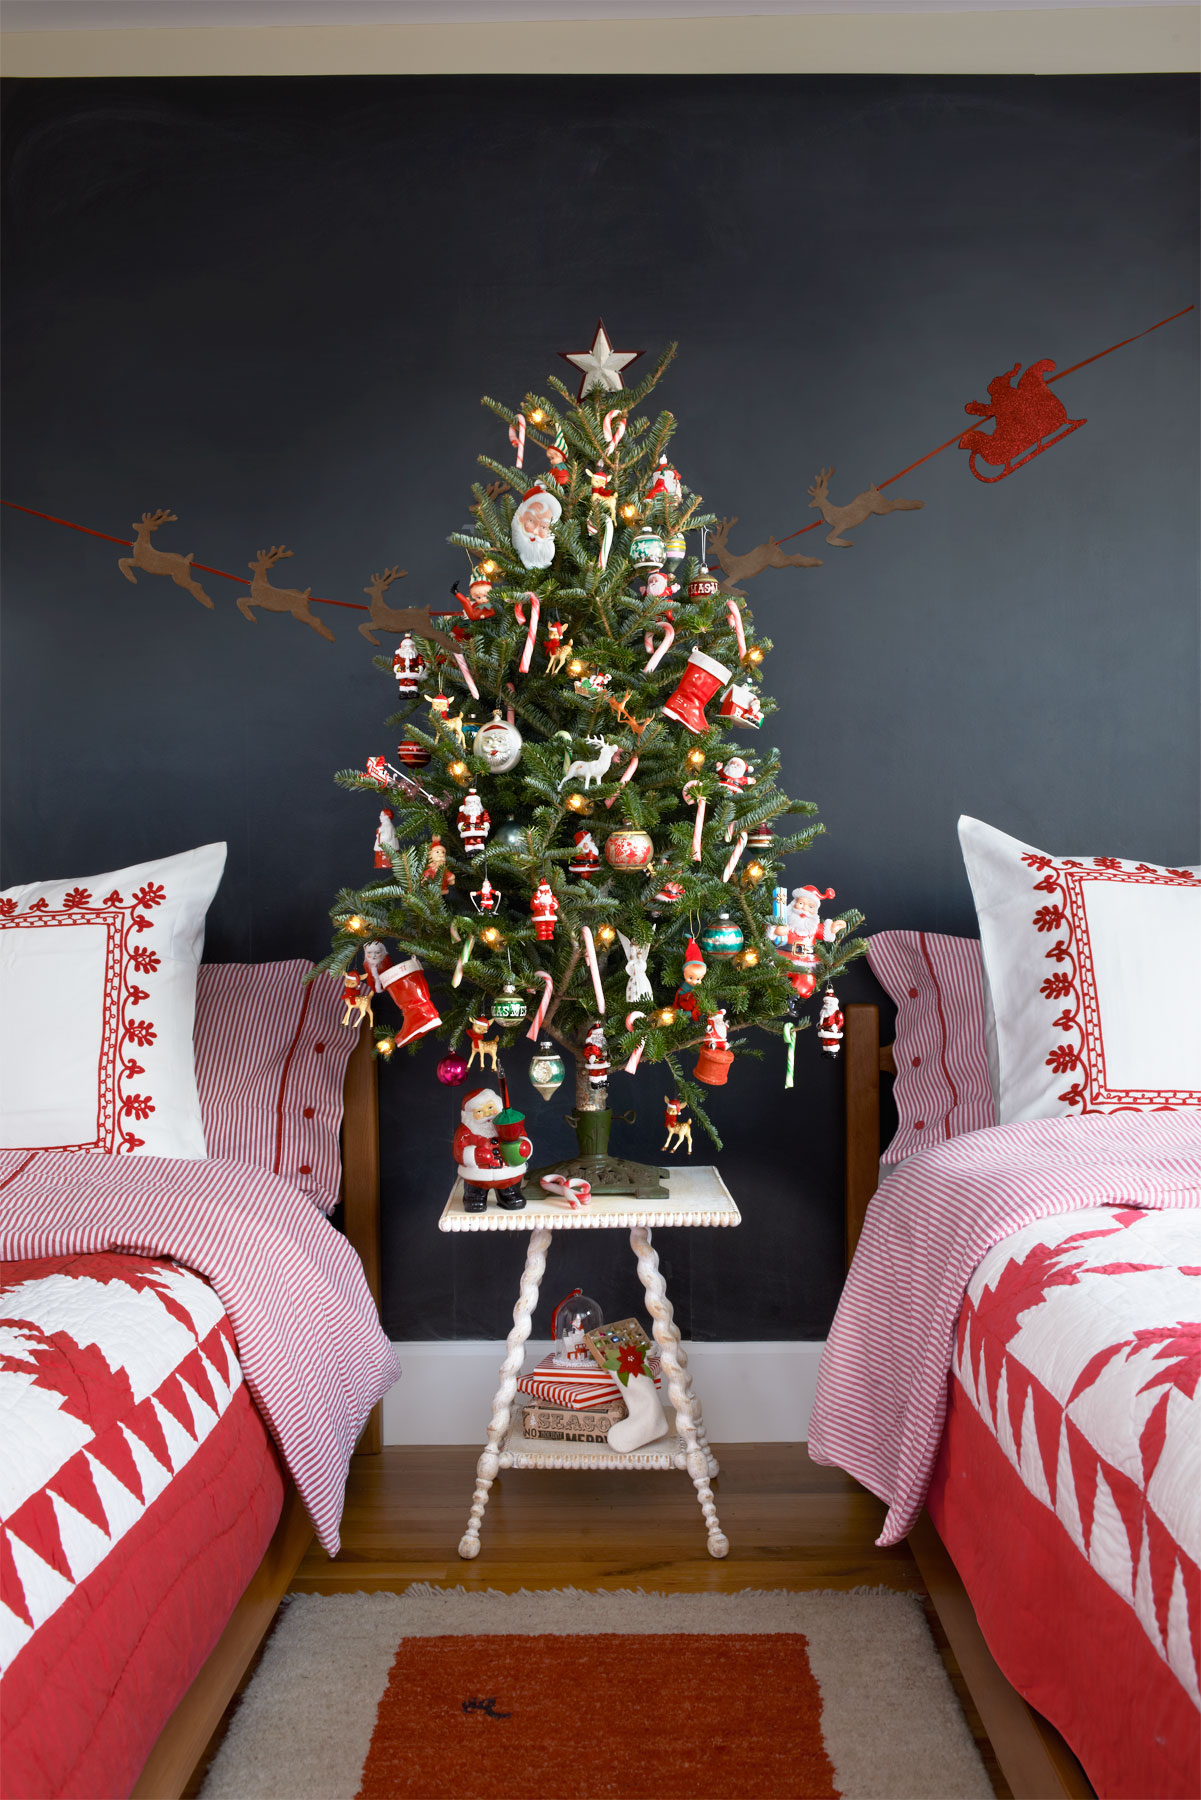 A small tree decorated with colorful ornaments is a great idea for a kid's room, let them choose the decor themselves